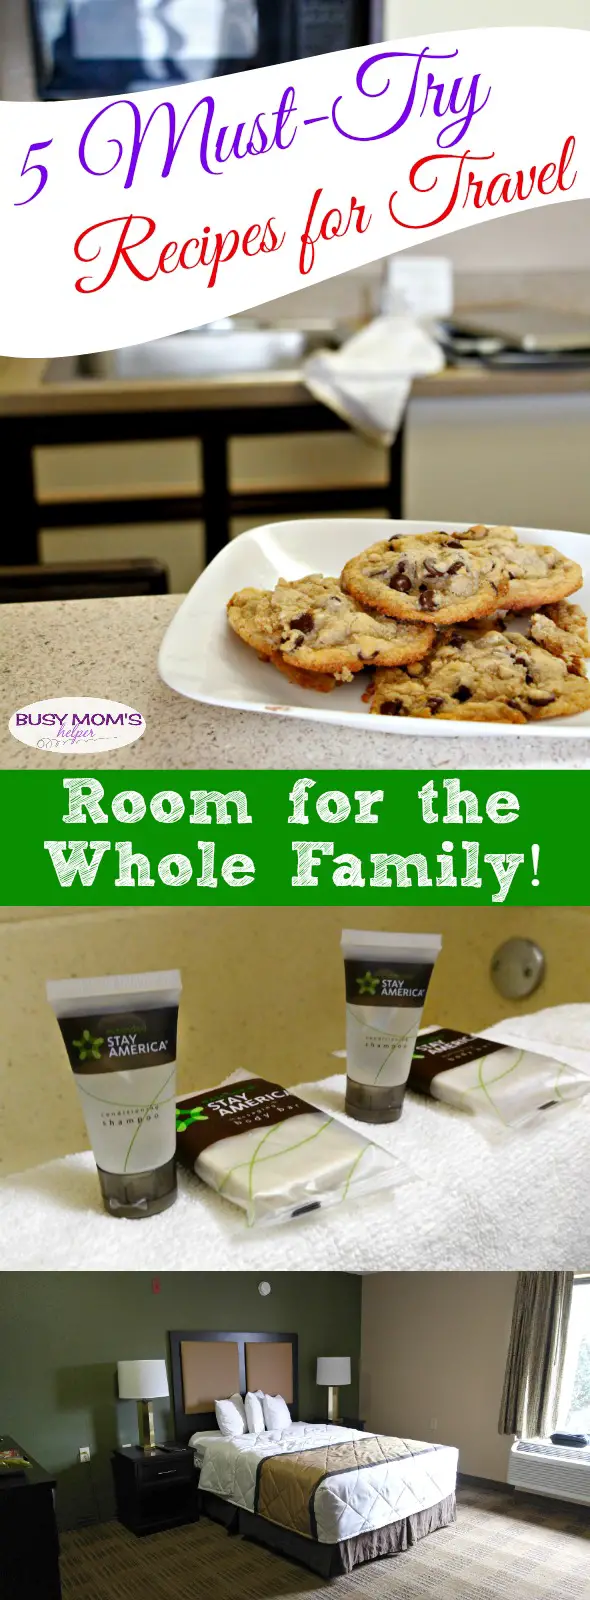 5 Must Try Recipes for Travel / Room for the whole family at Extended Stay America! #sponsored #myESA @TheExtendedStay 